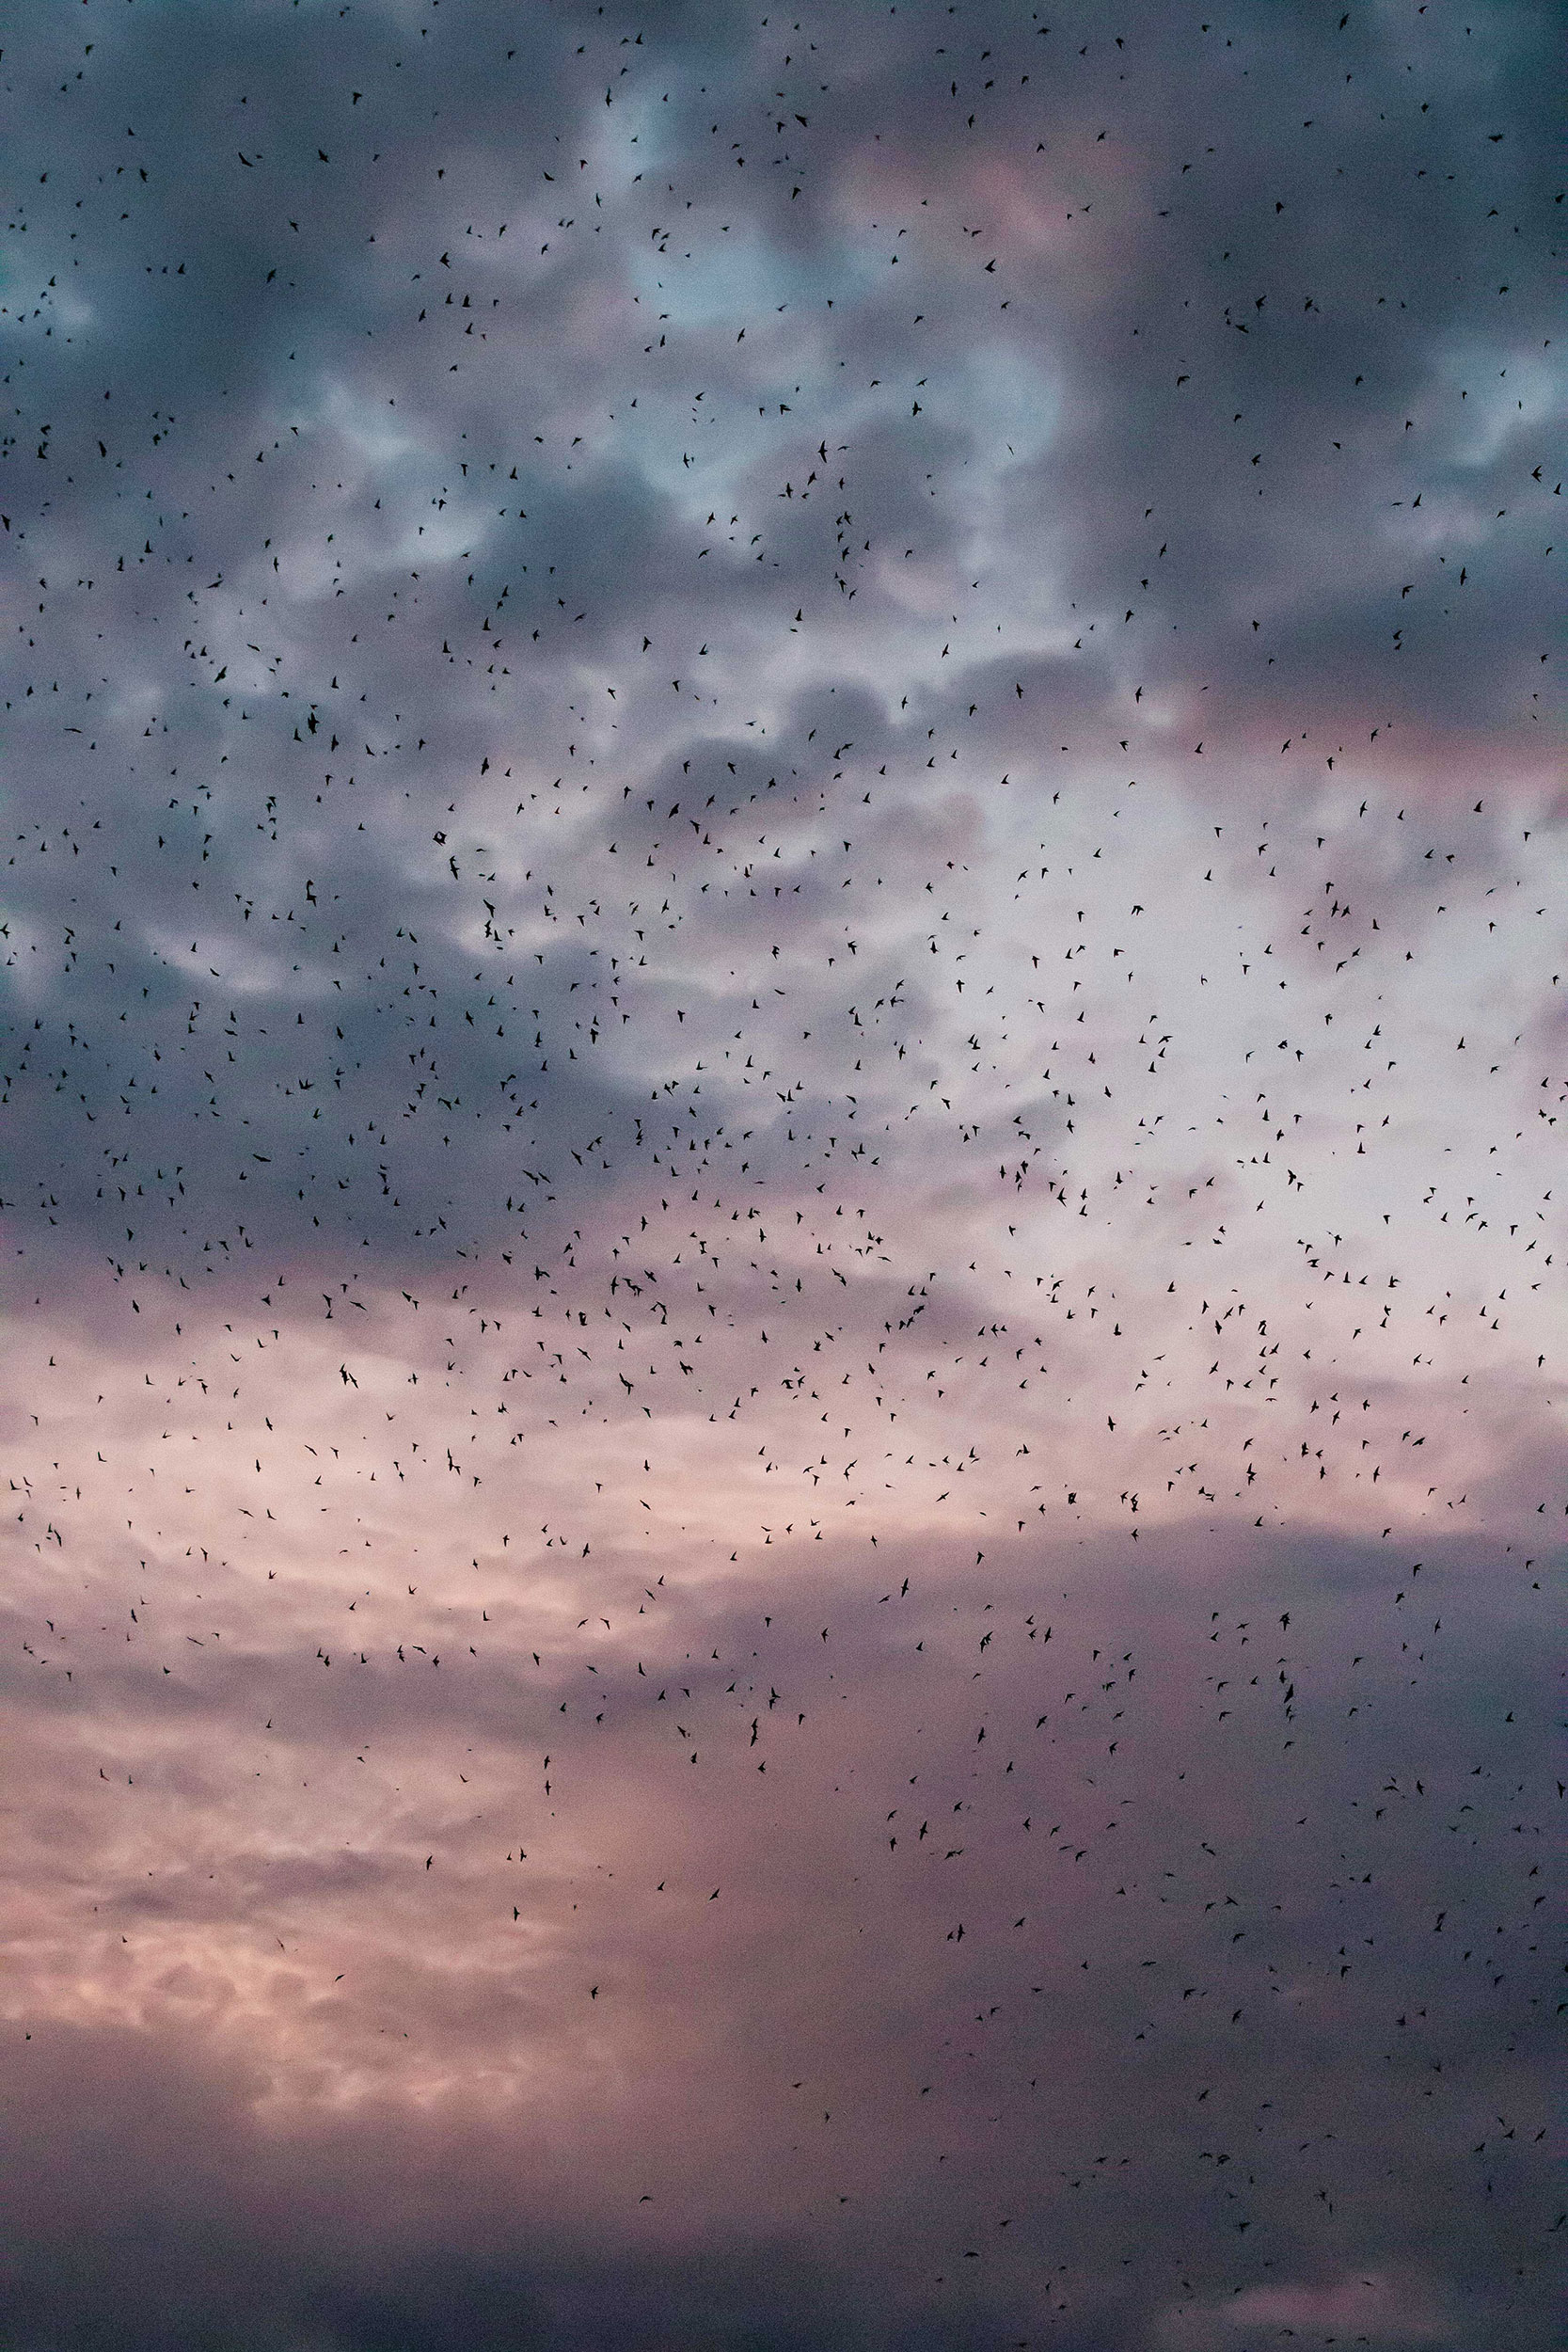 Hundreds to thousands of Vaux's Swifts migrating to Central America for the winter.